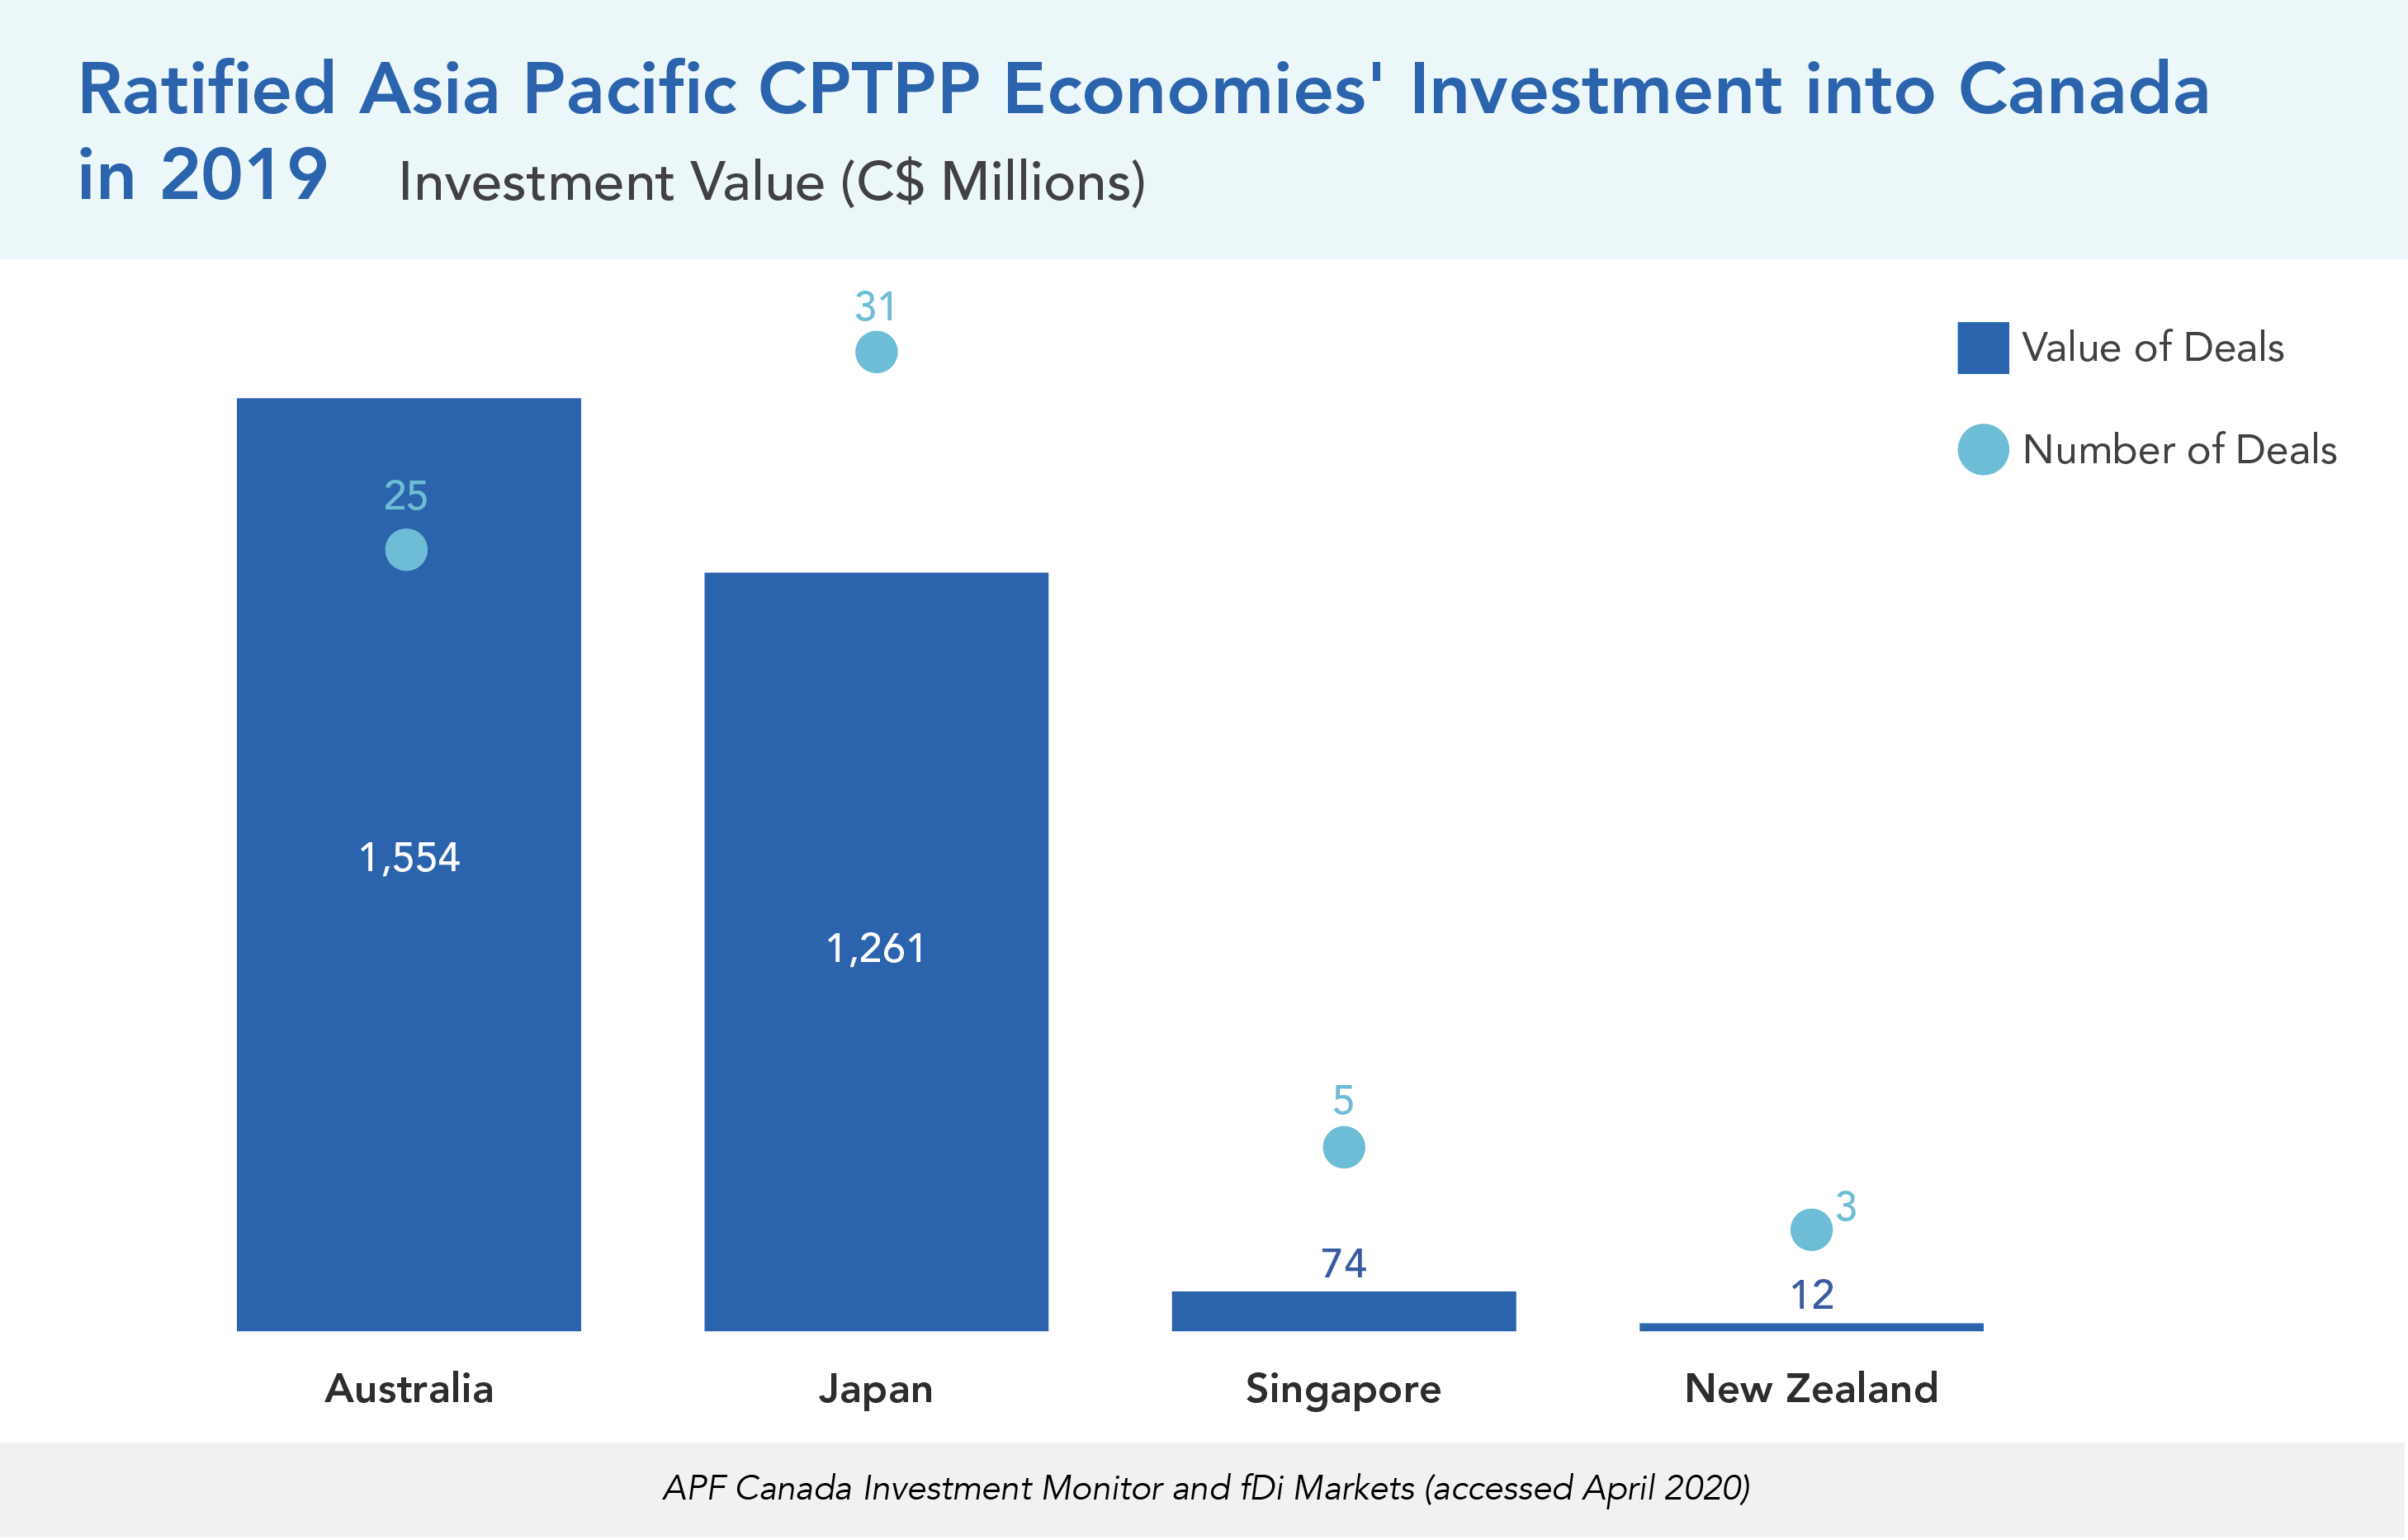 Ratified Asia Pacific CPTPP Economies' Investment into Canada in 2019